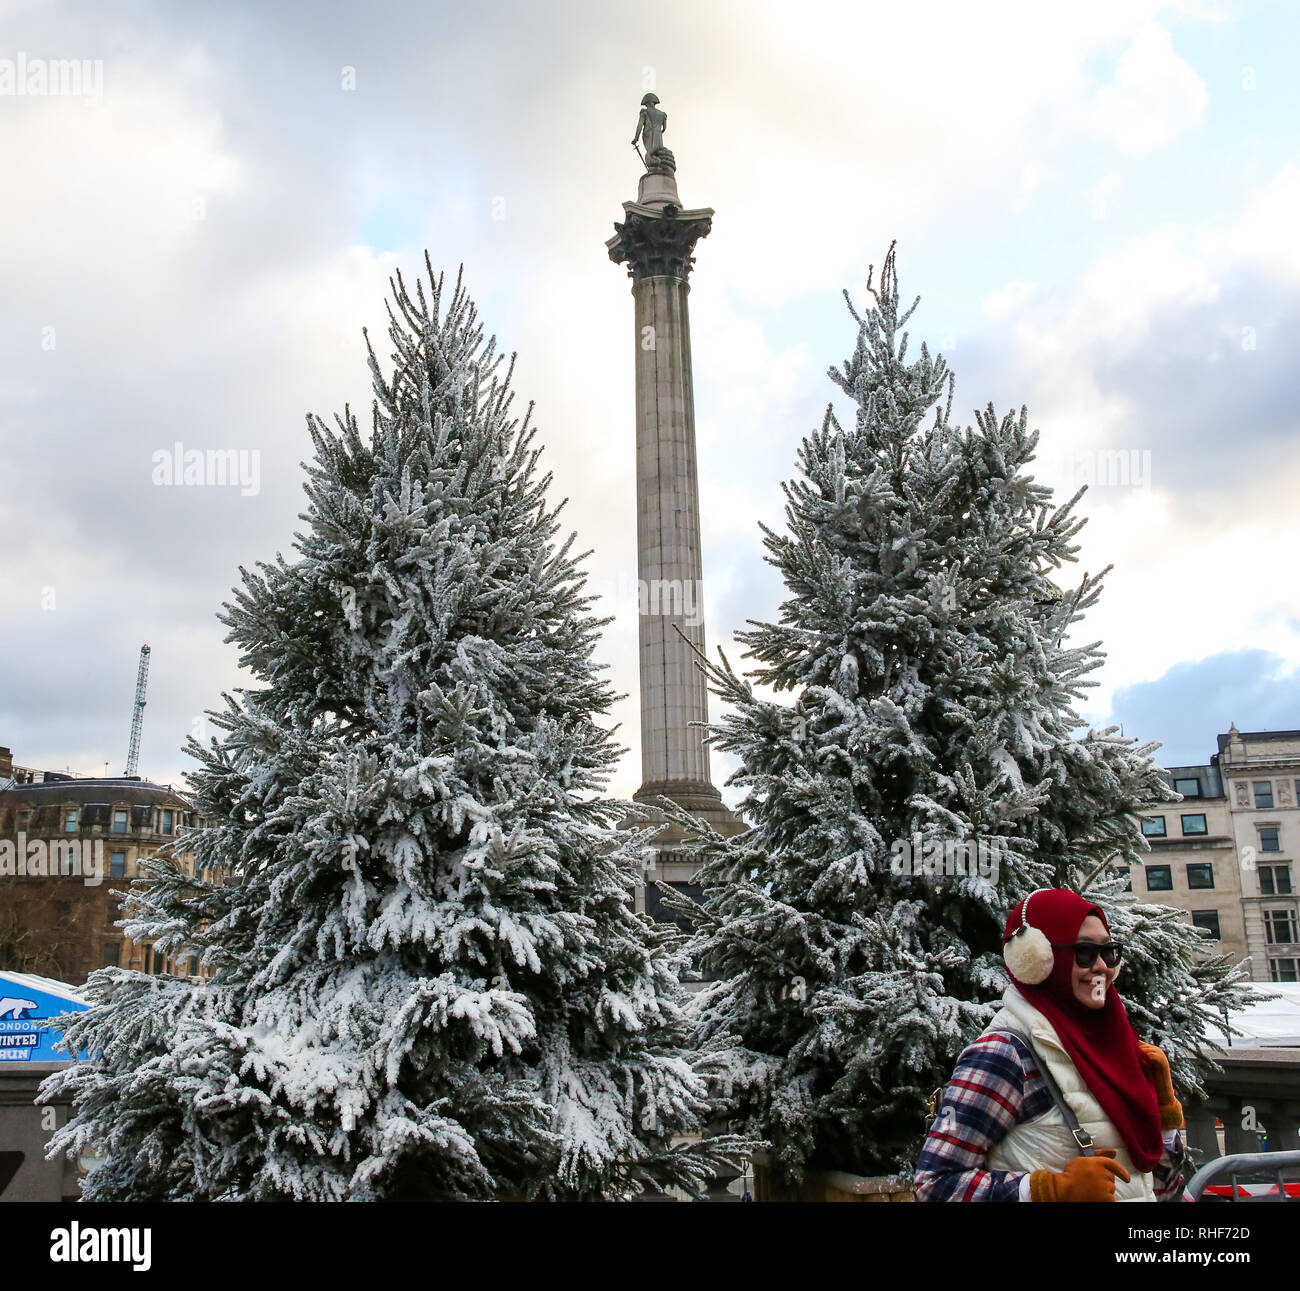 Fir trees in London's Trafalgar Square are seen covered in fake snow in preparation for the 5th Cancer Research UK London, Winter Run which will take place on Sunday 3 February.  The 10k run will start from Trafalgar Square, which will set the runner onto the course with a burst of snow. Stock Photo